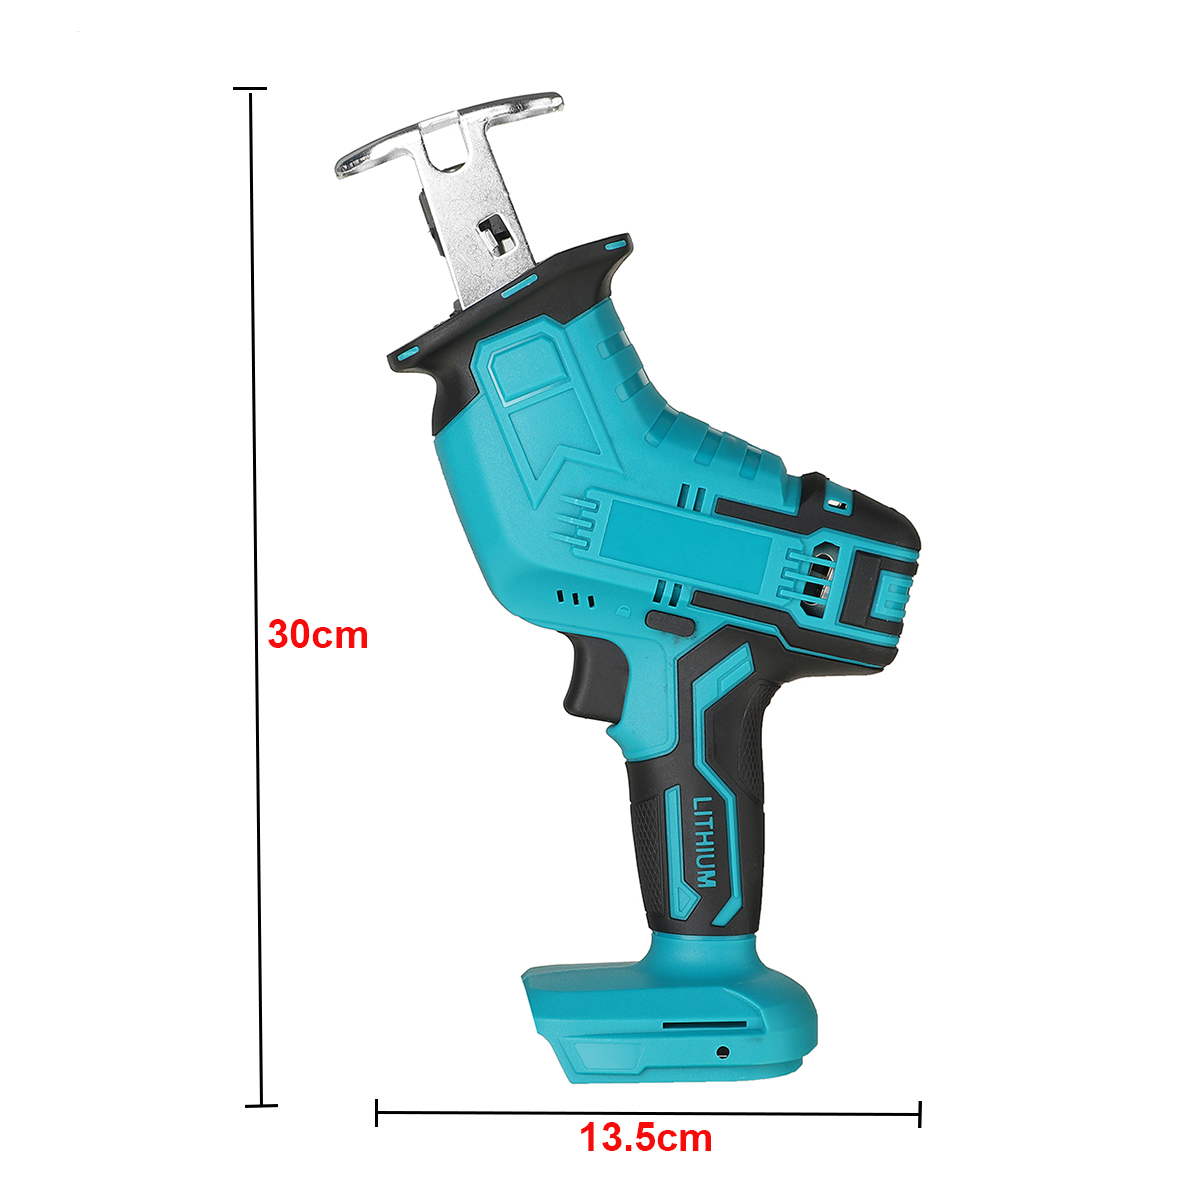 Cordless-Reciprocating-Saw-Portable-Electric-Saw-Wood-Cutting-Tool-For-Makita-18V-Battery-1786908-5